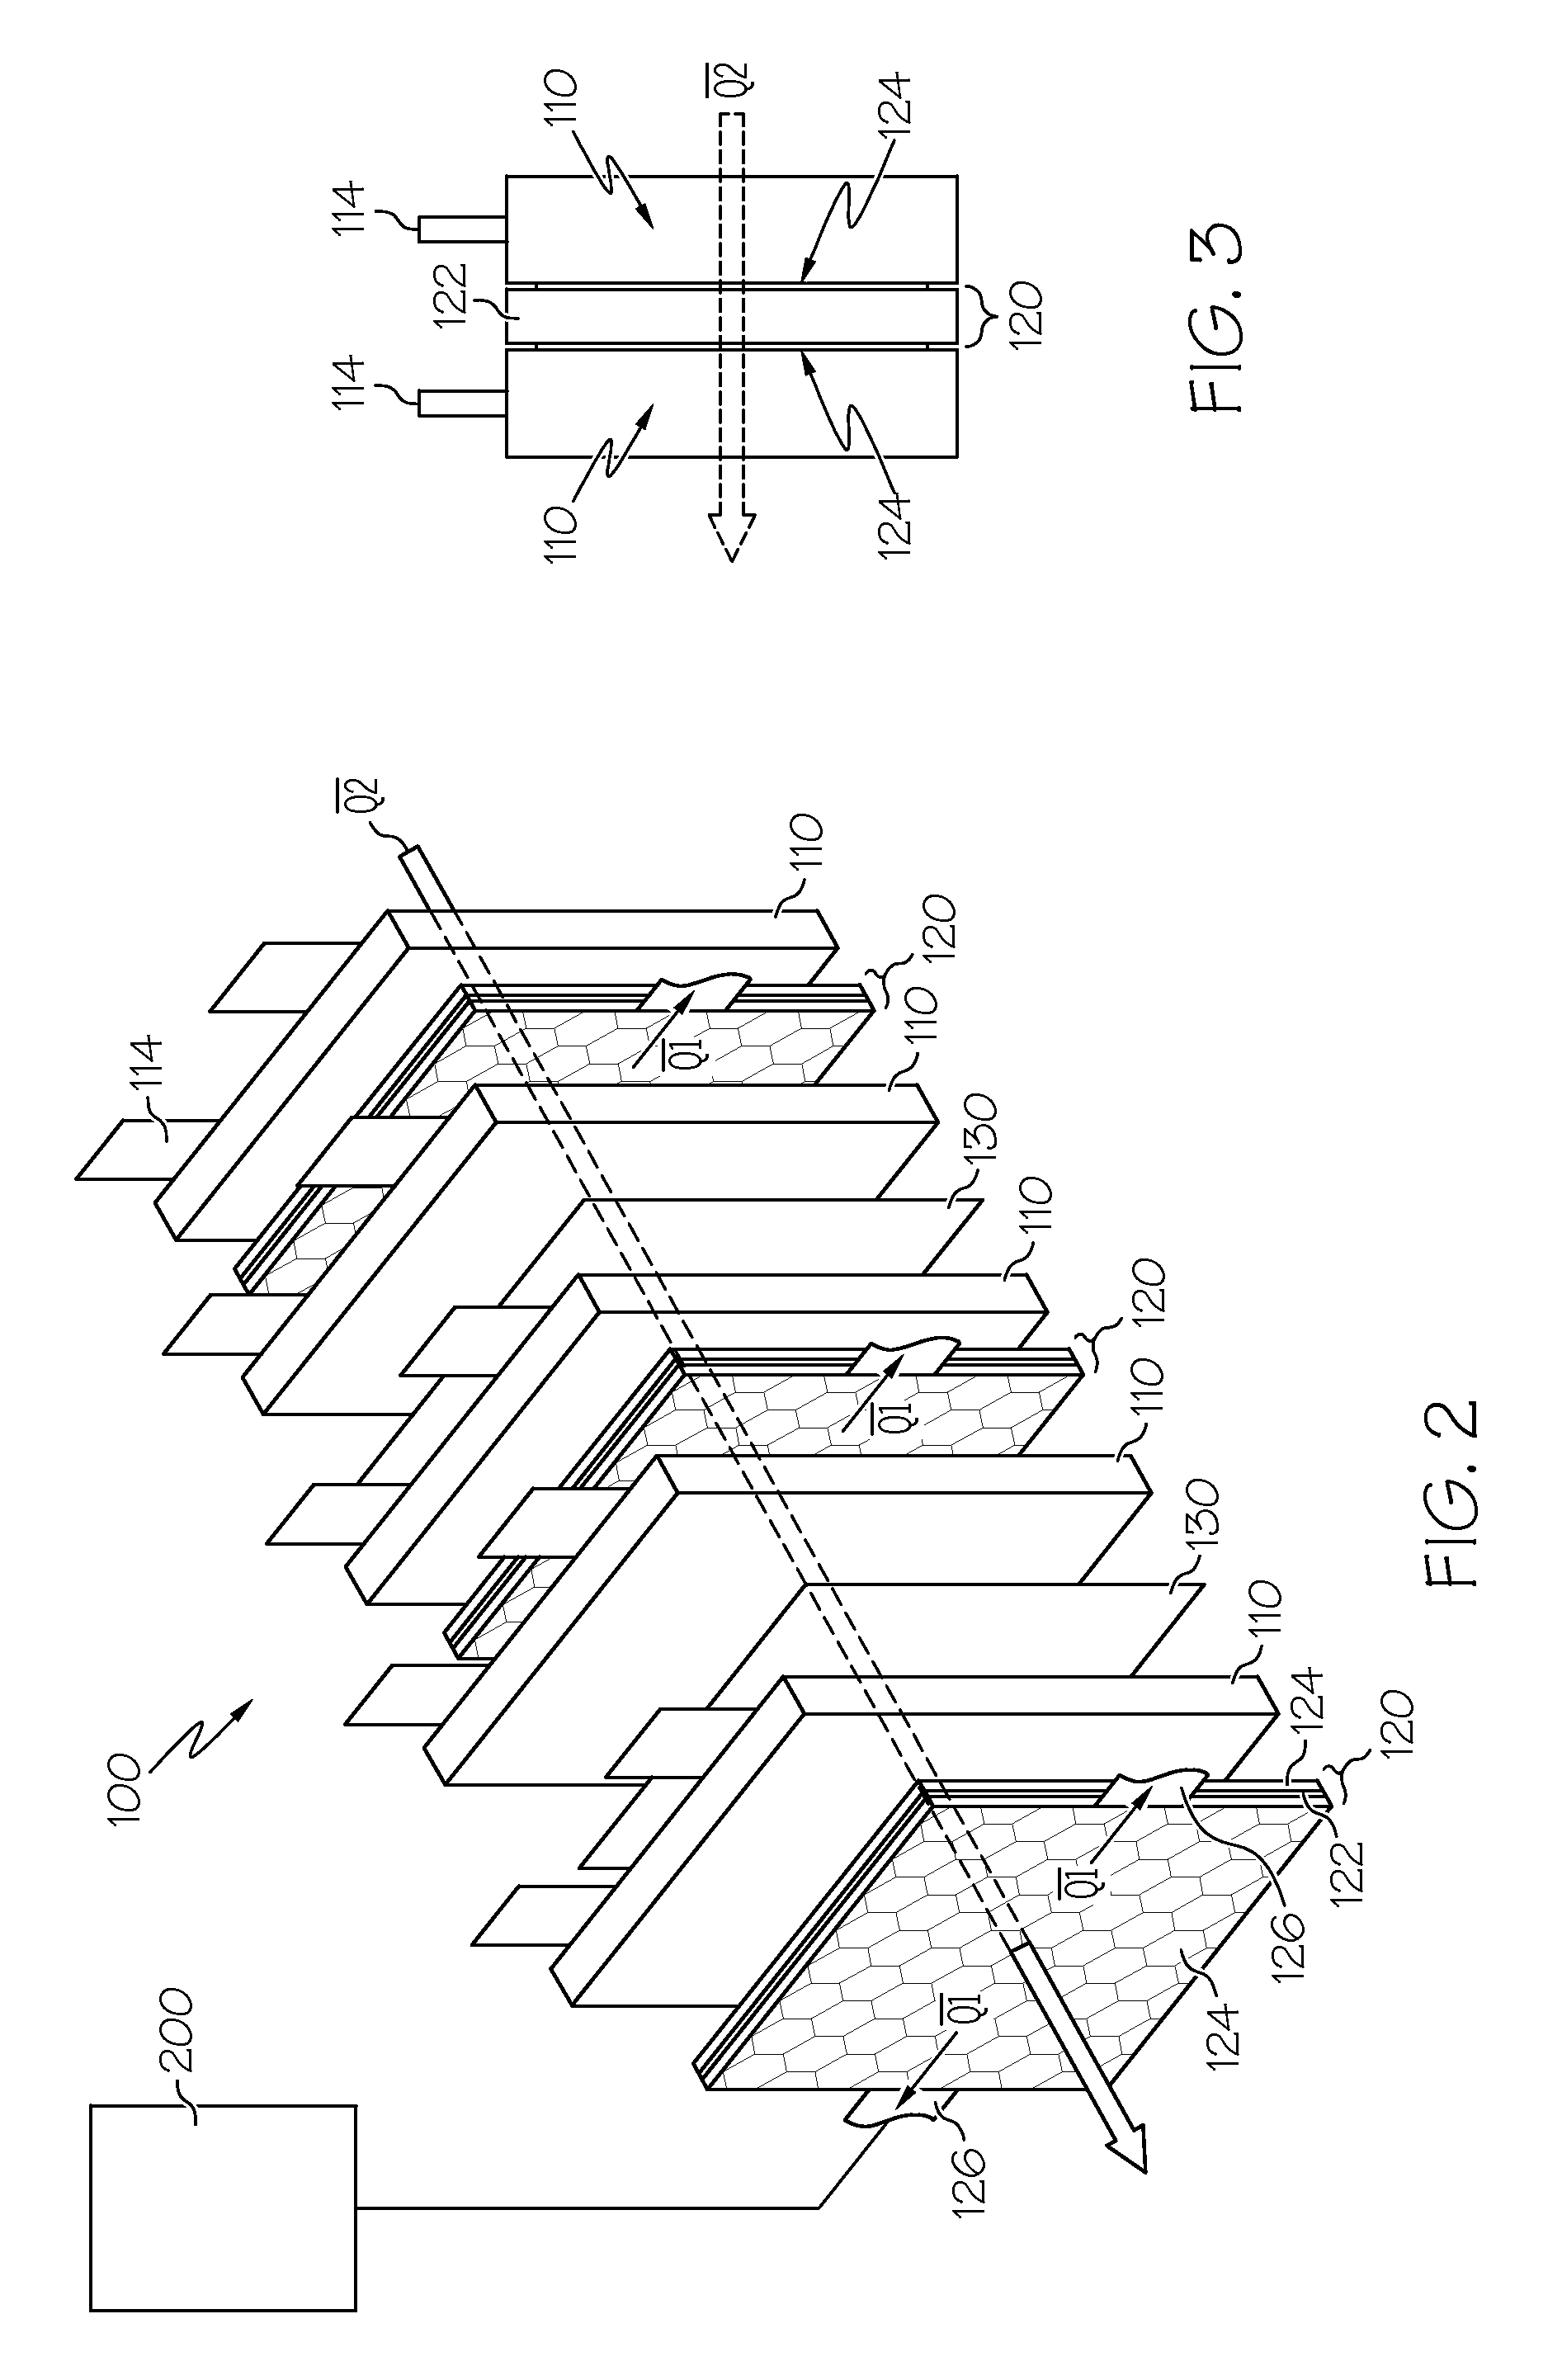 Method For Thermal Management And Mitigation Of Thermal Propagation For Batteries Using A Graphene Coated Polymer Barrier Substrate